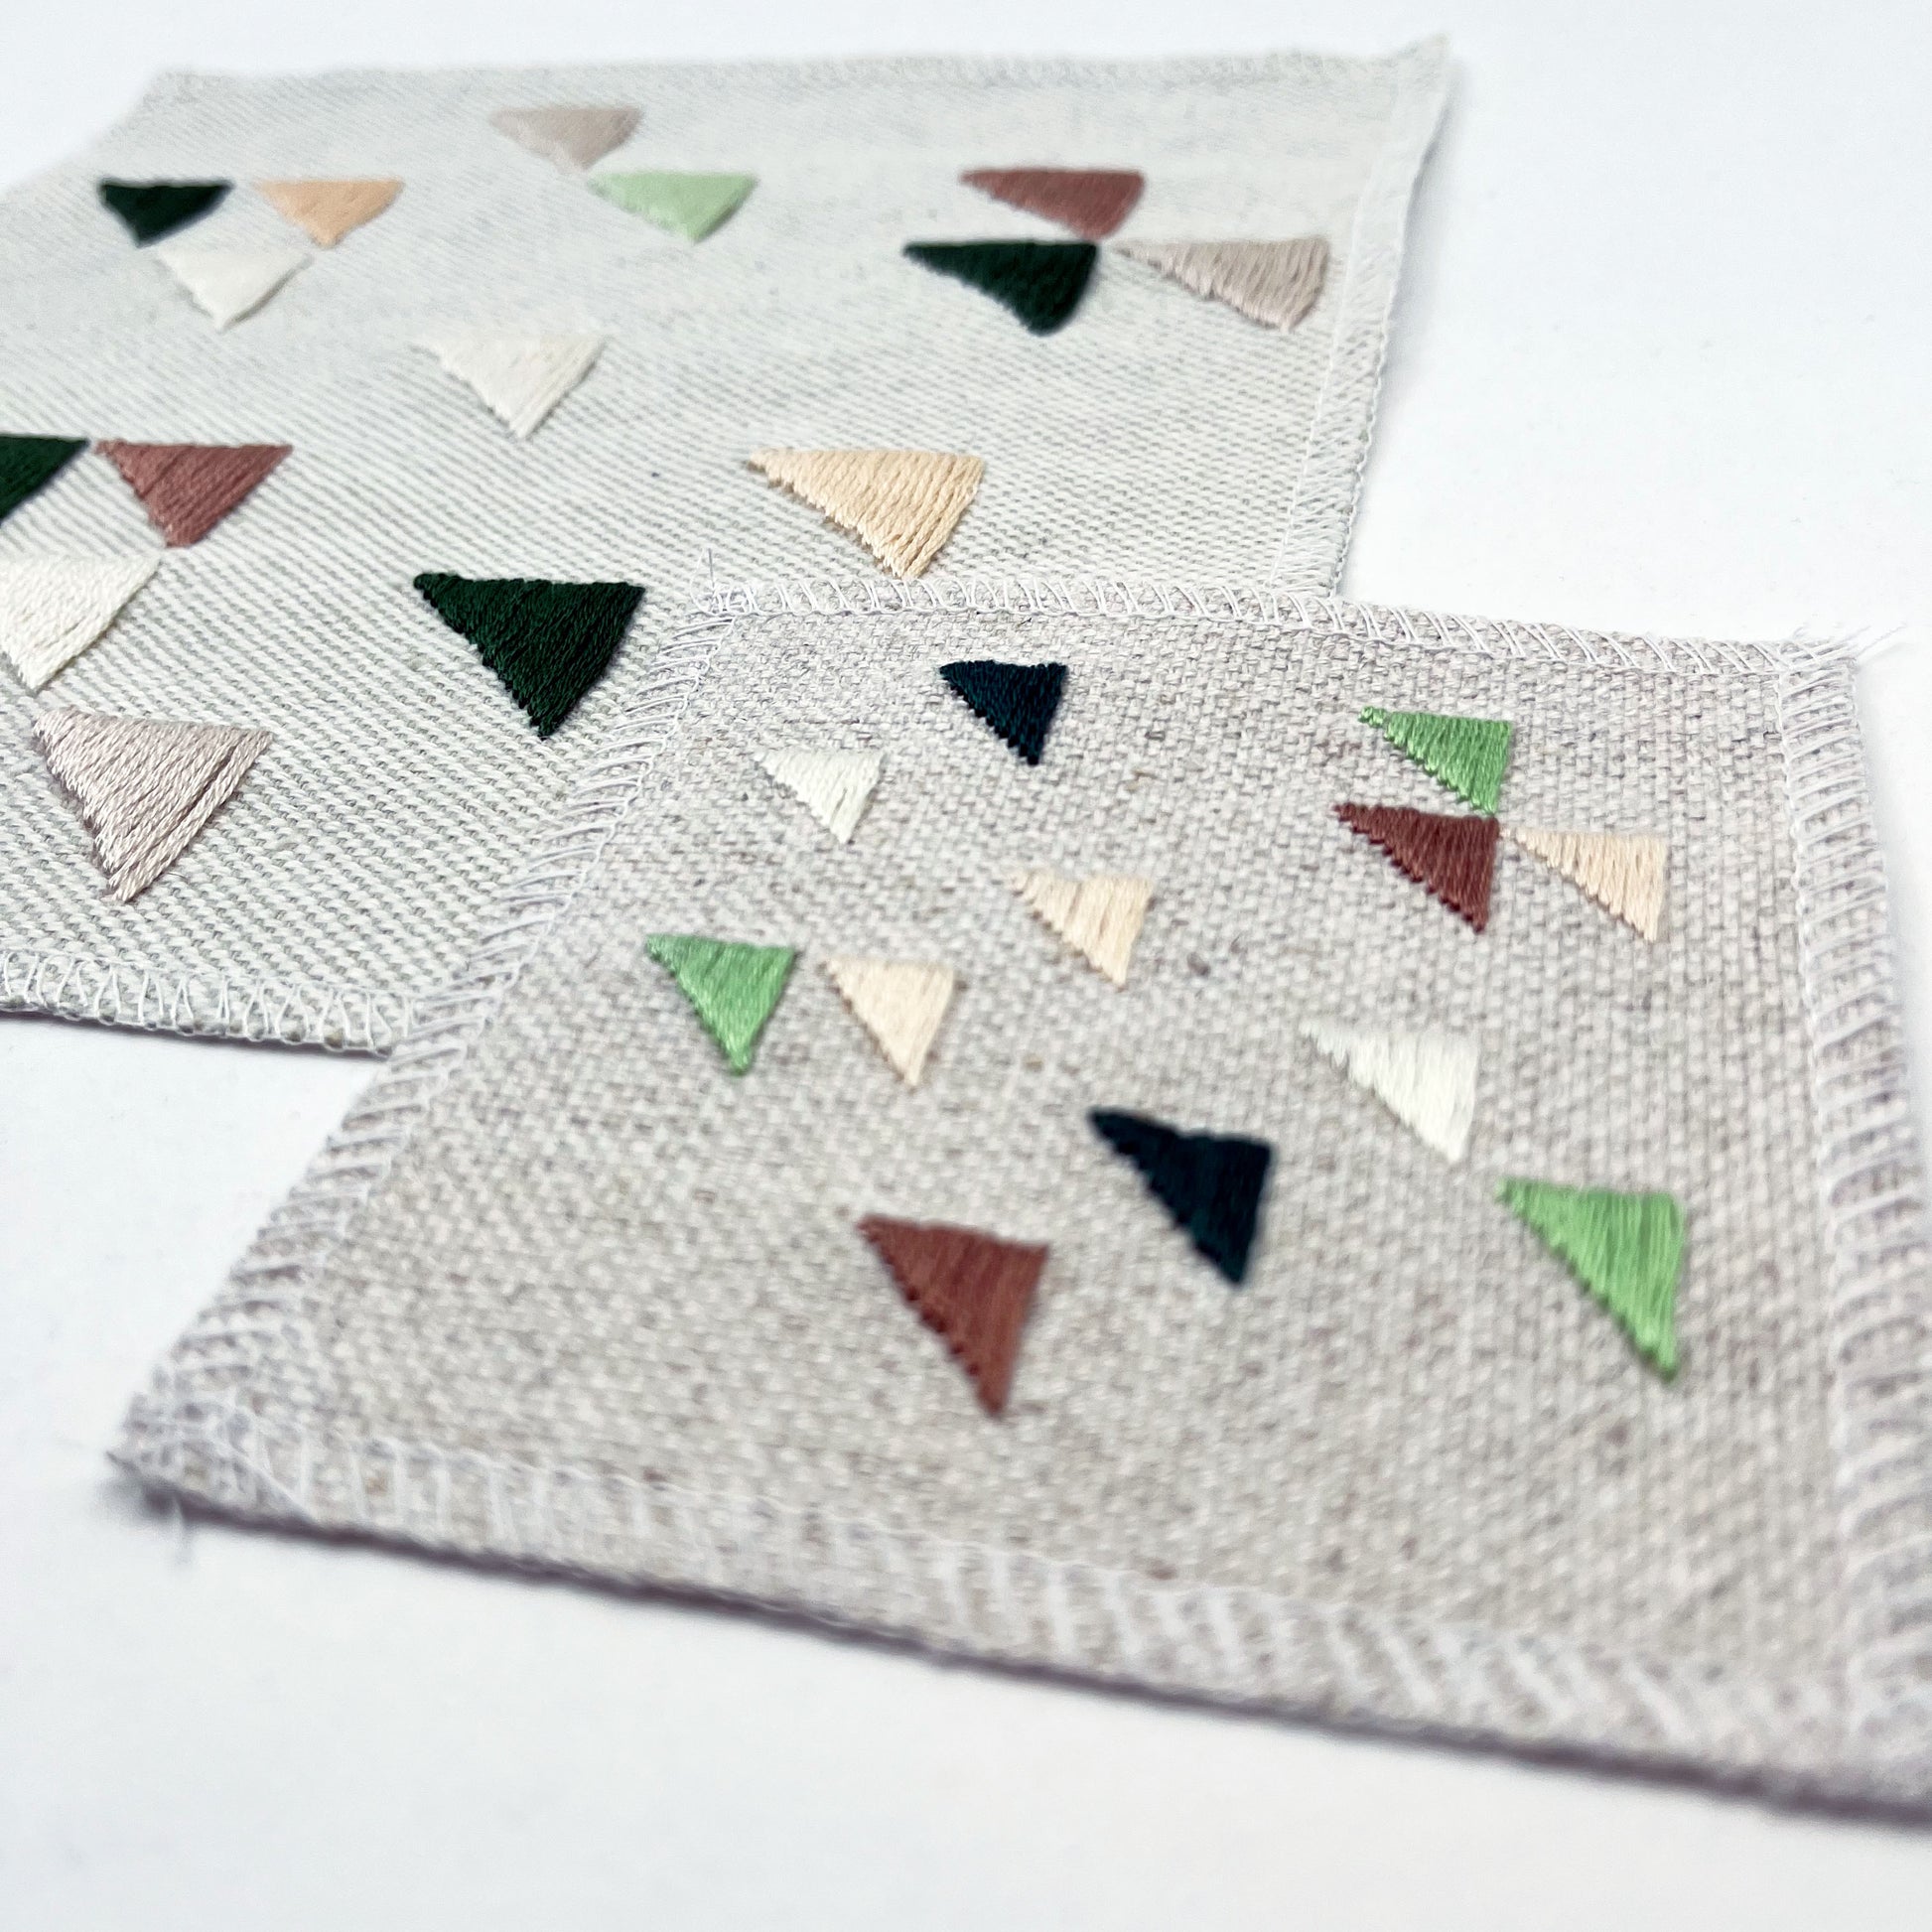 close up angled view of two square natural colored patches in different sizes embroidered with randomly placed triangles in peaches, mauves and greens, on a white background